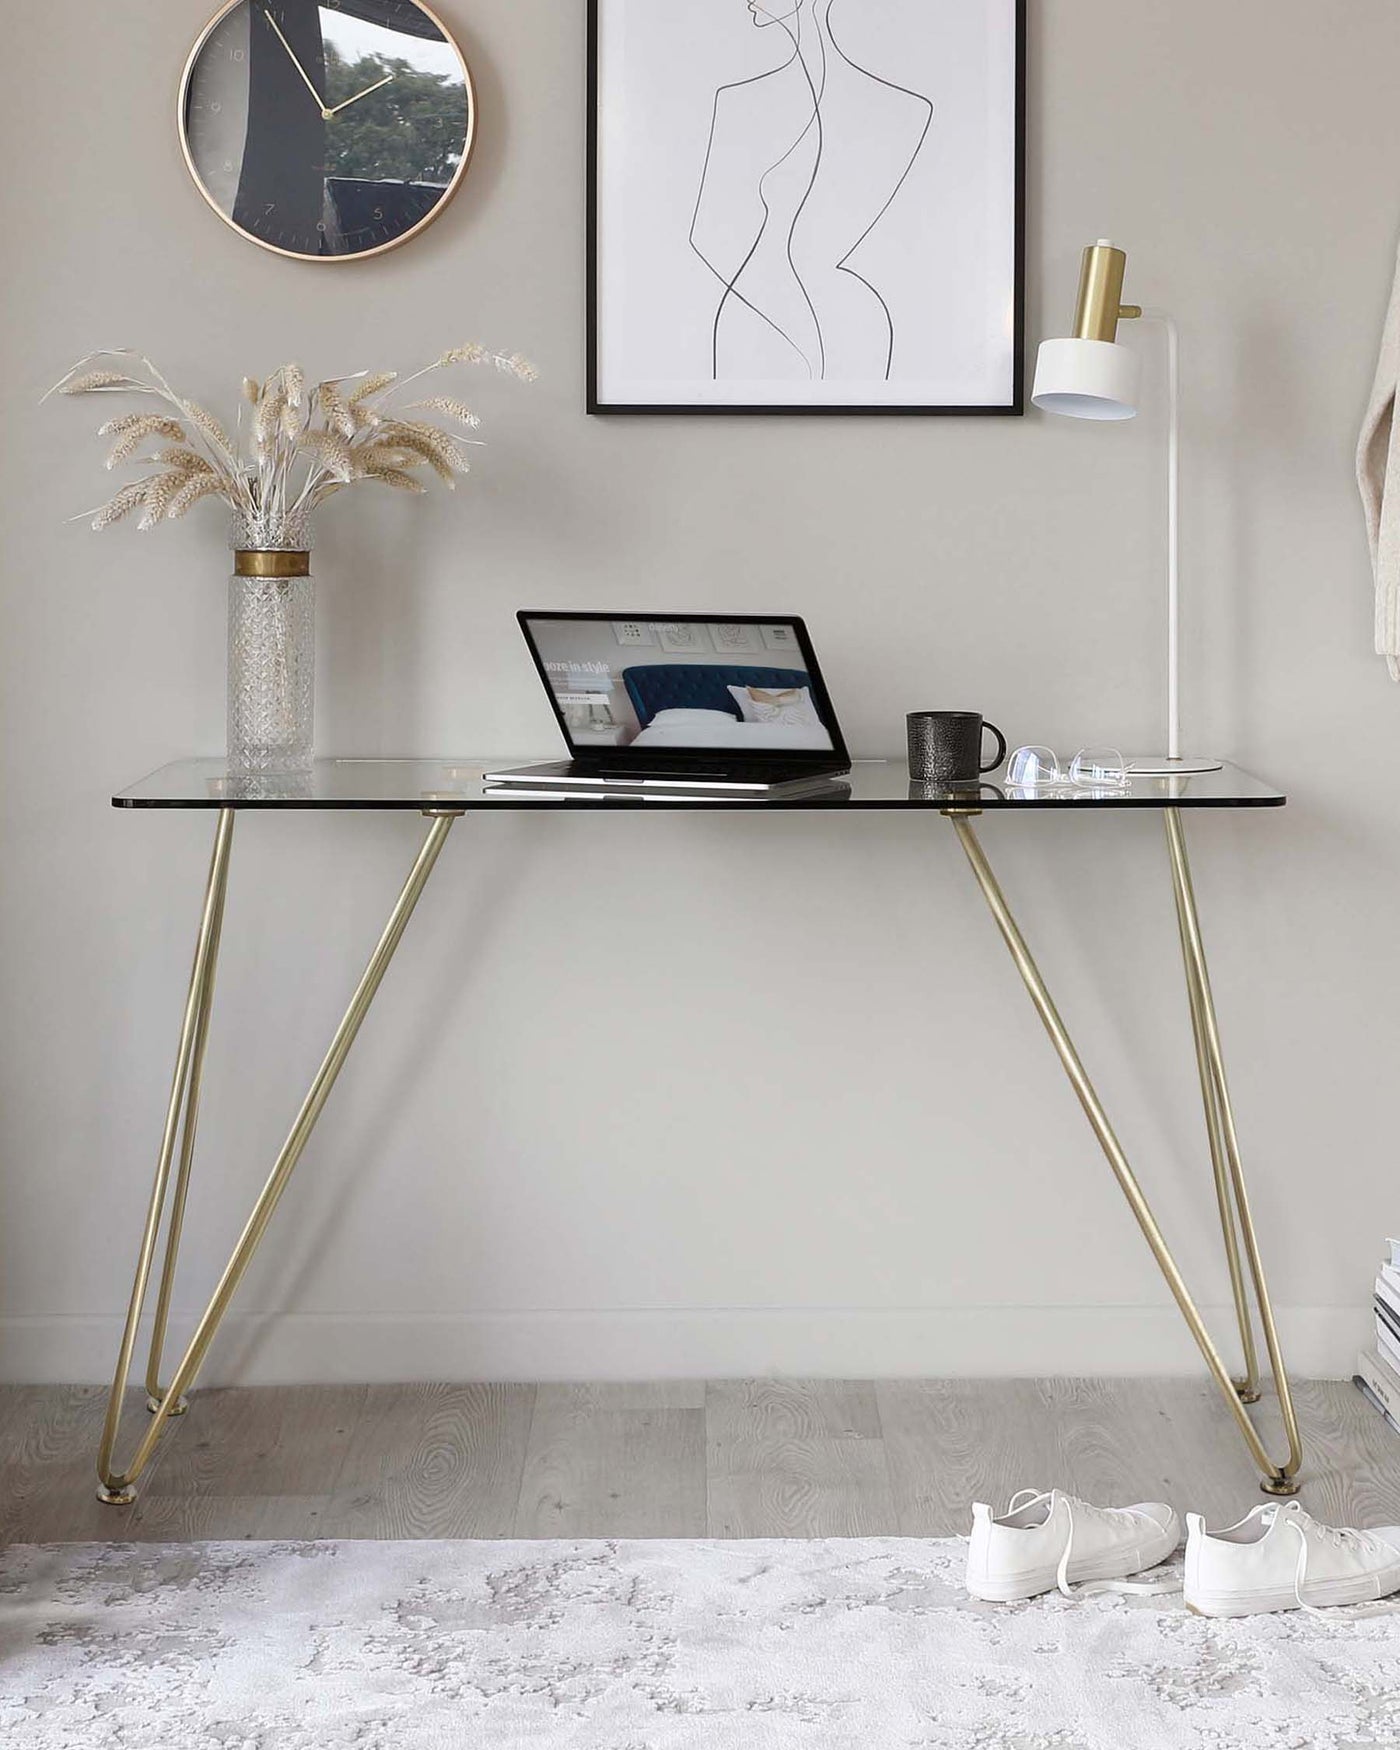 Elegant and modern black glass top writing desk with sleek gold metal legs in a minimalist room setting, accompanied by a gold-and-white floor lamp, a decorative vase with dried plant arrangement, and framed artwork on the wall.